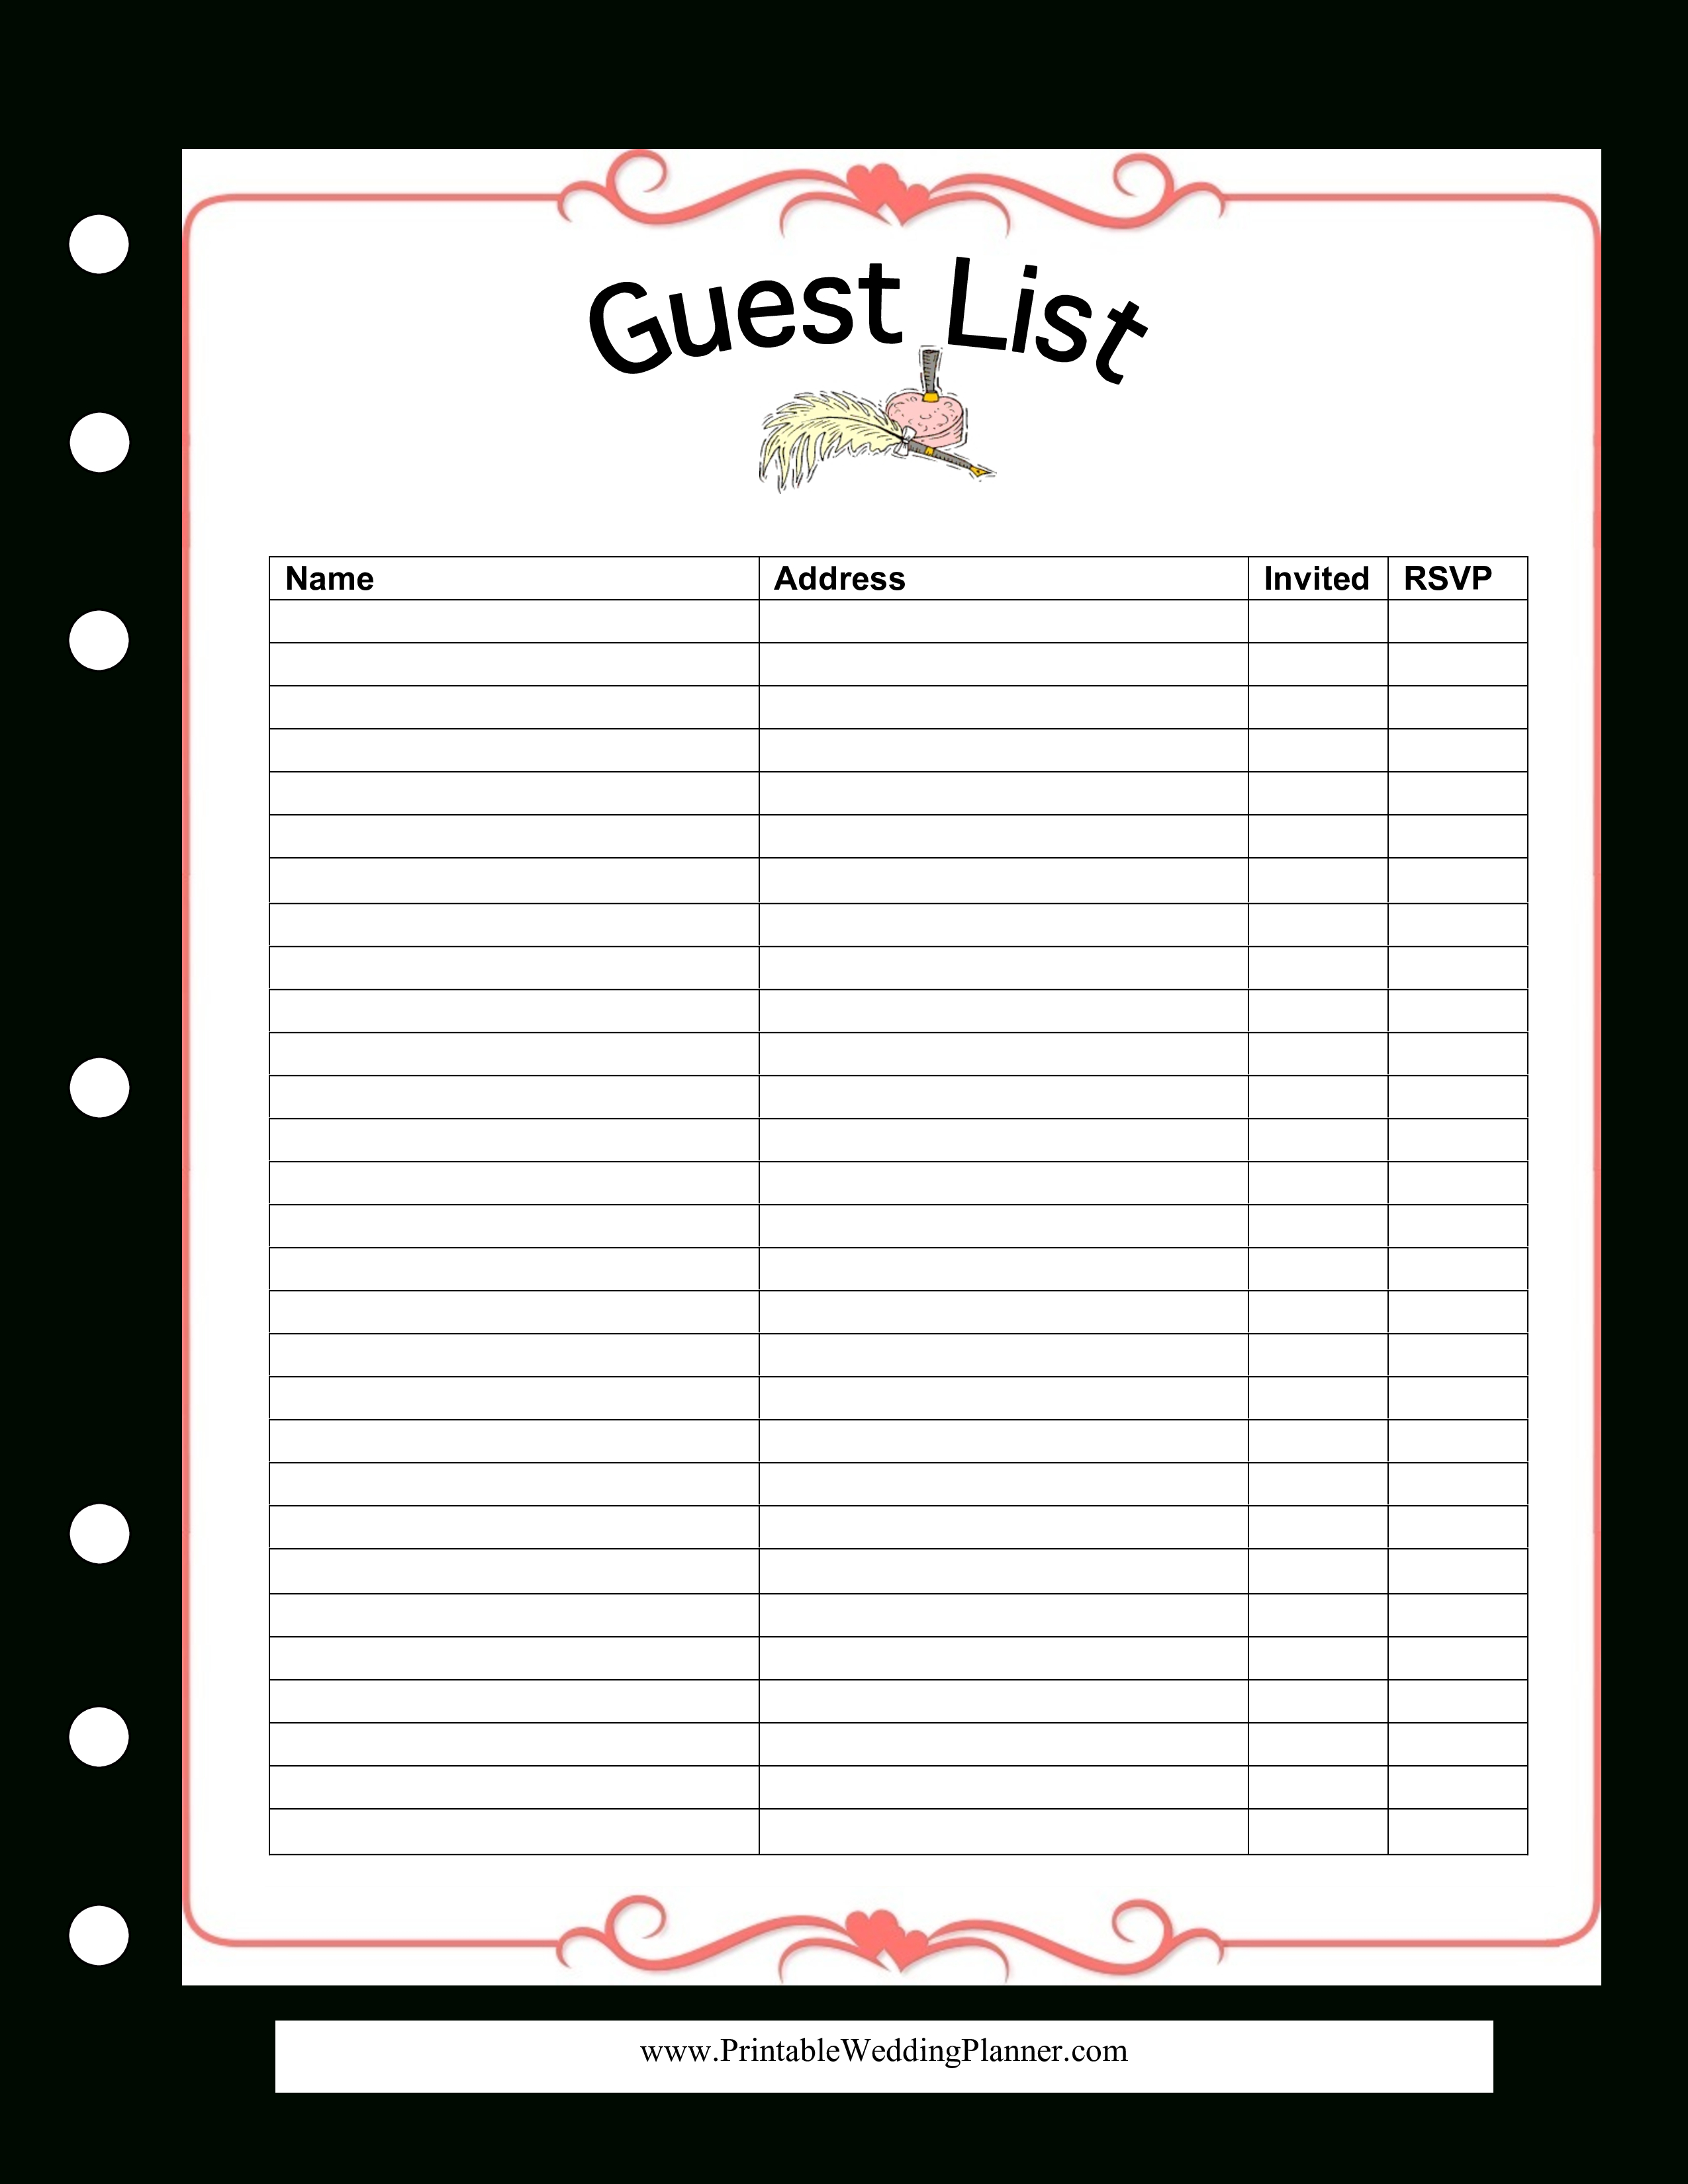 Wedding Guest Spreadsheet With Regard To Free Wedding Guest List Spreadsheet  Templates At